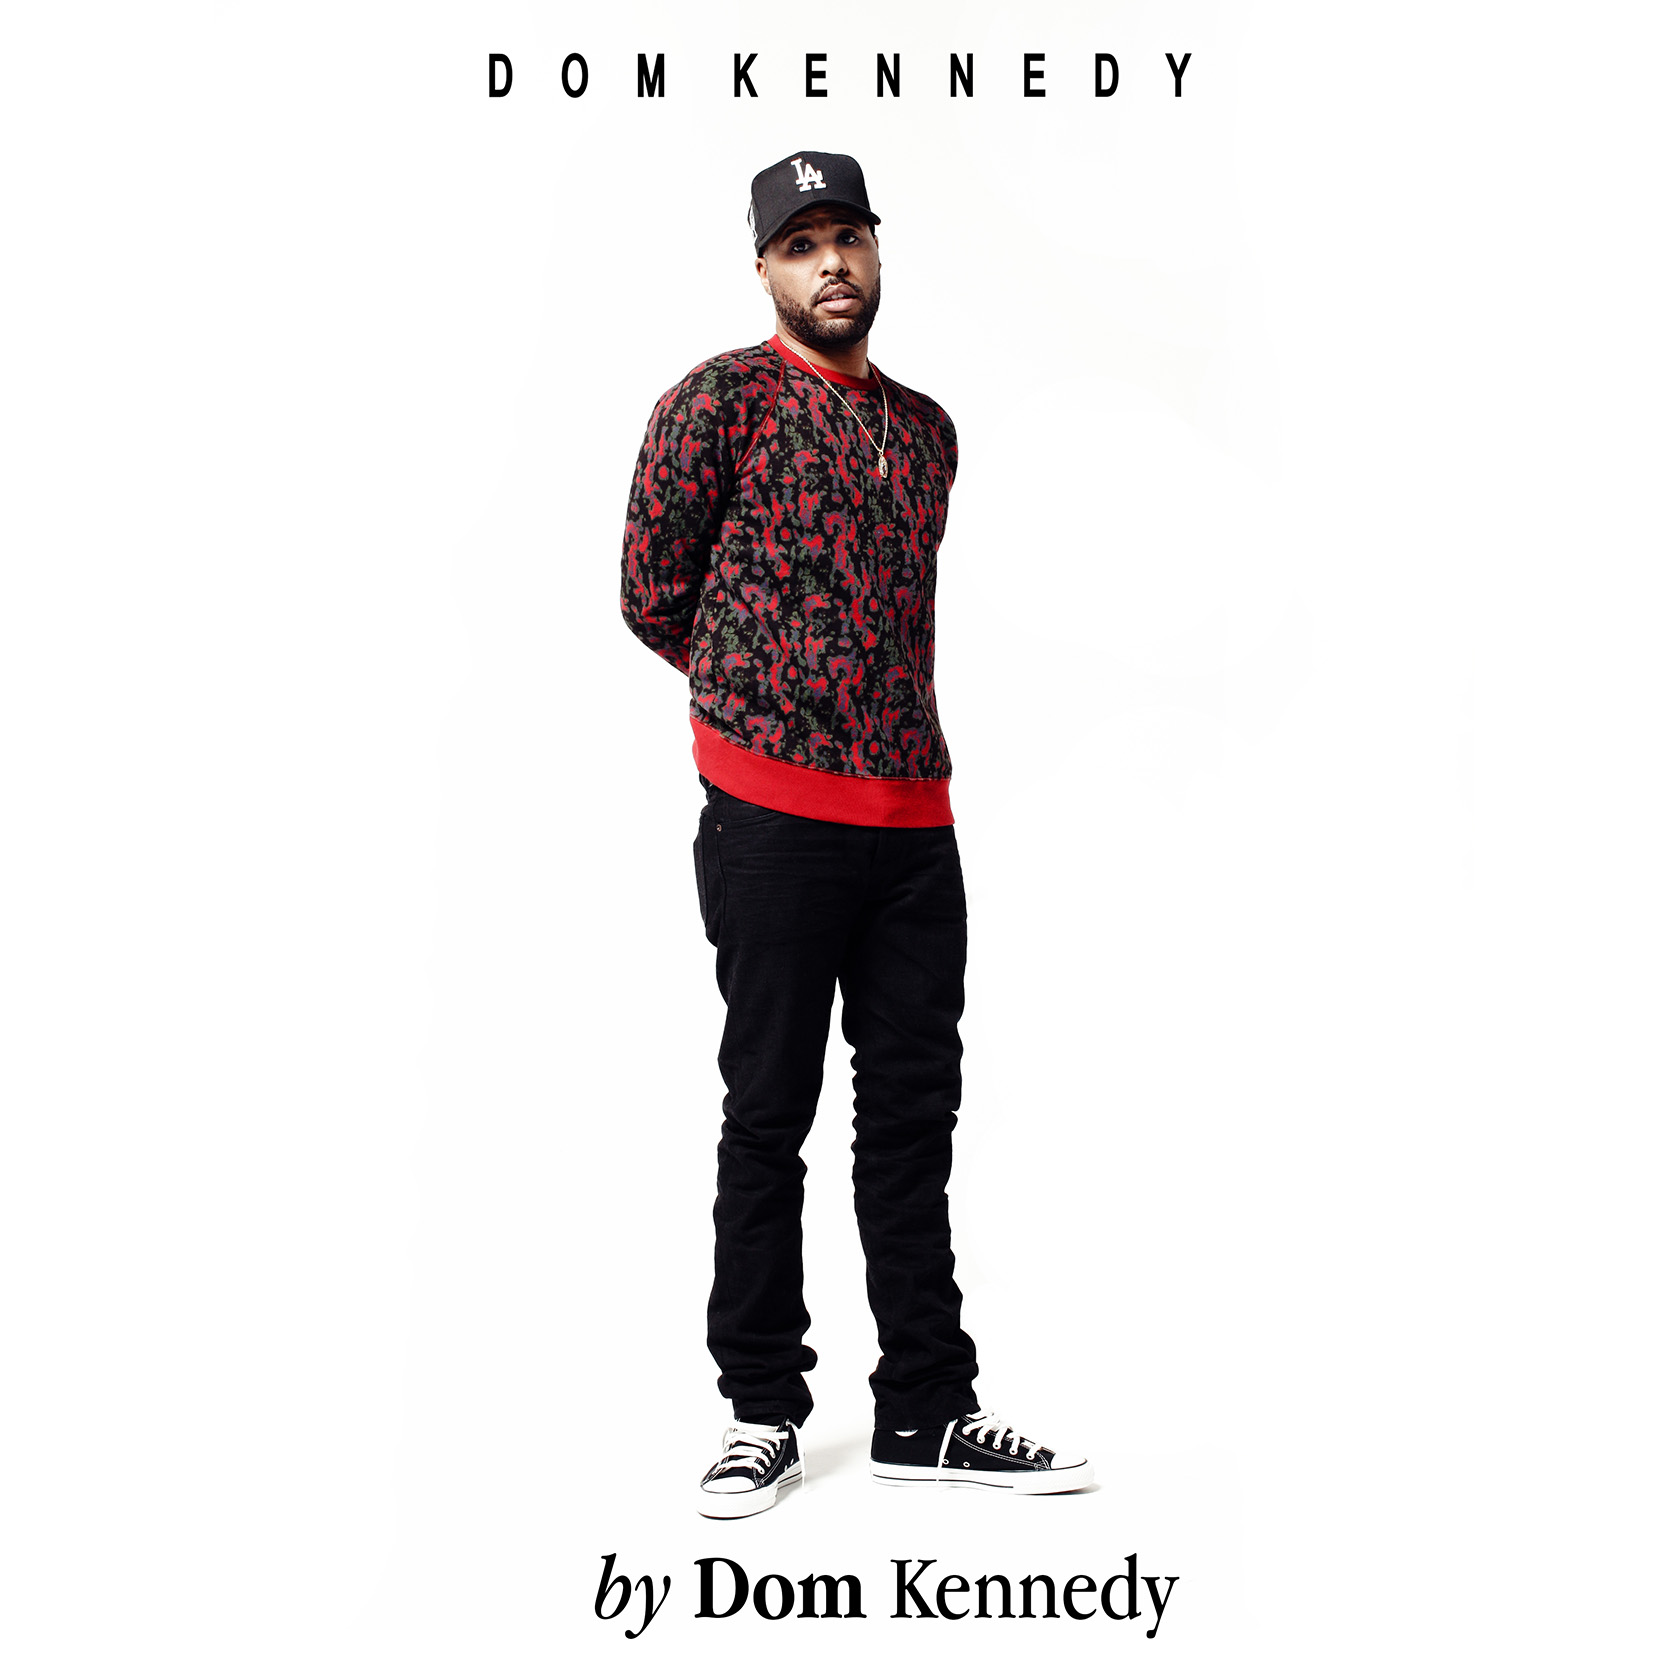 HAPPY NEW YEAR 🎆 from this dope soul Dom Kennedy @dopeitsdom and